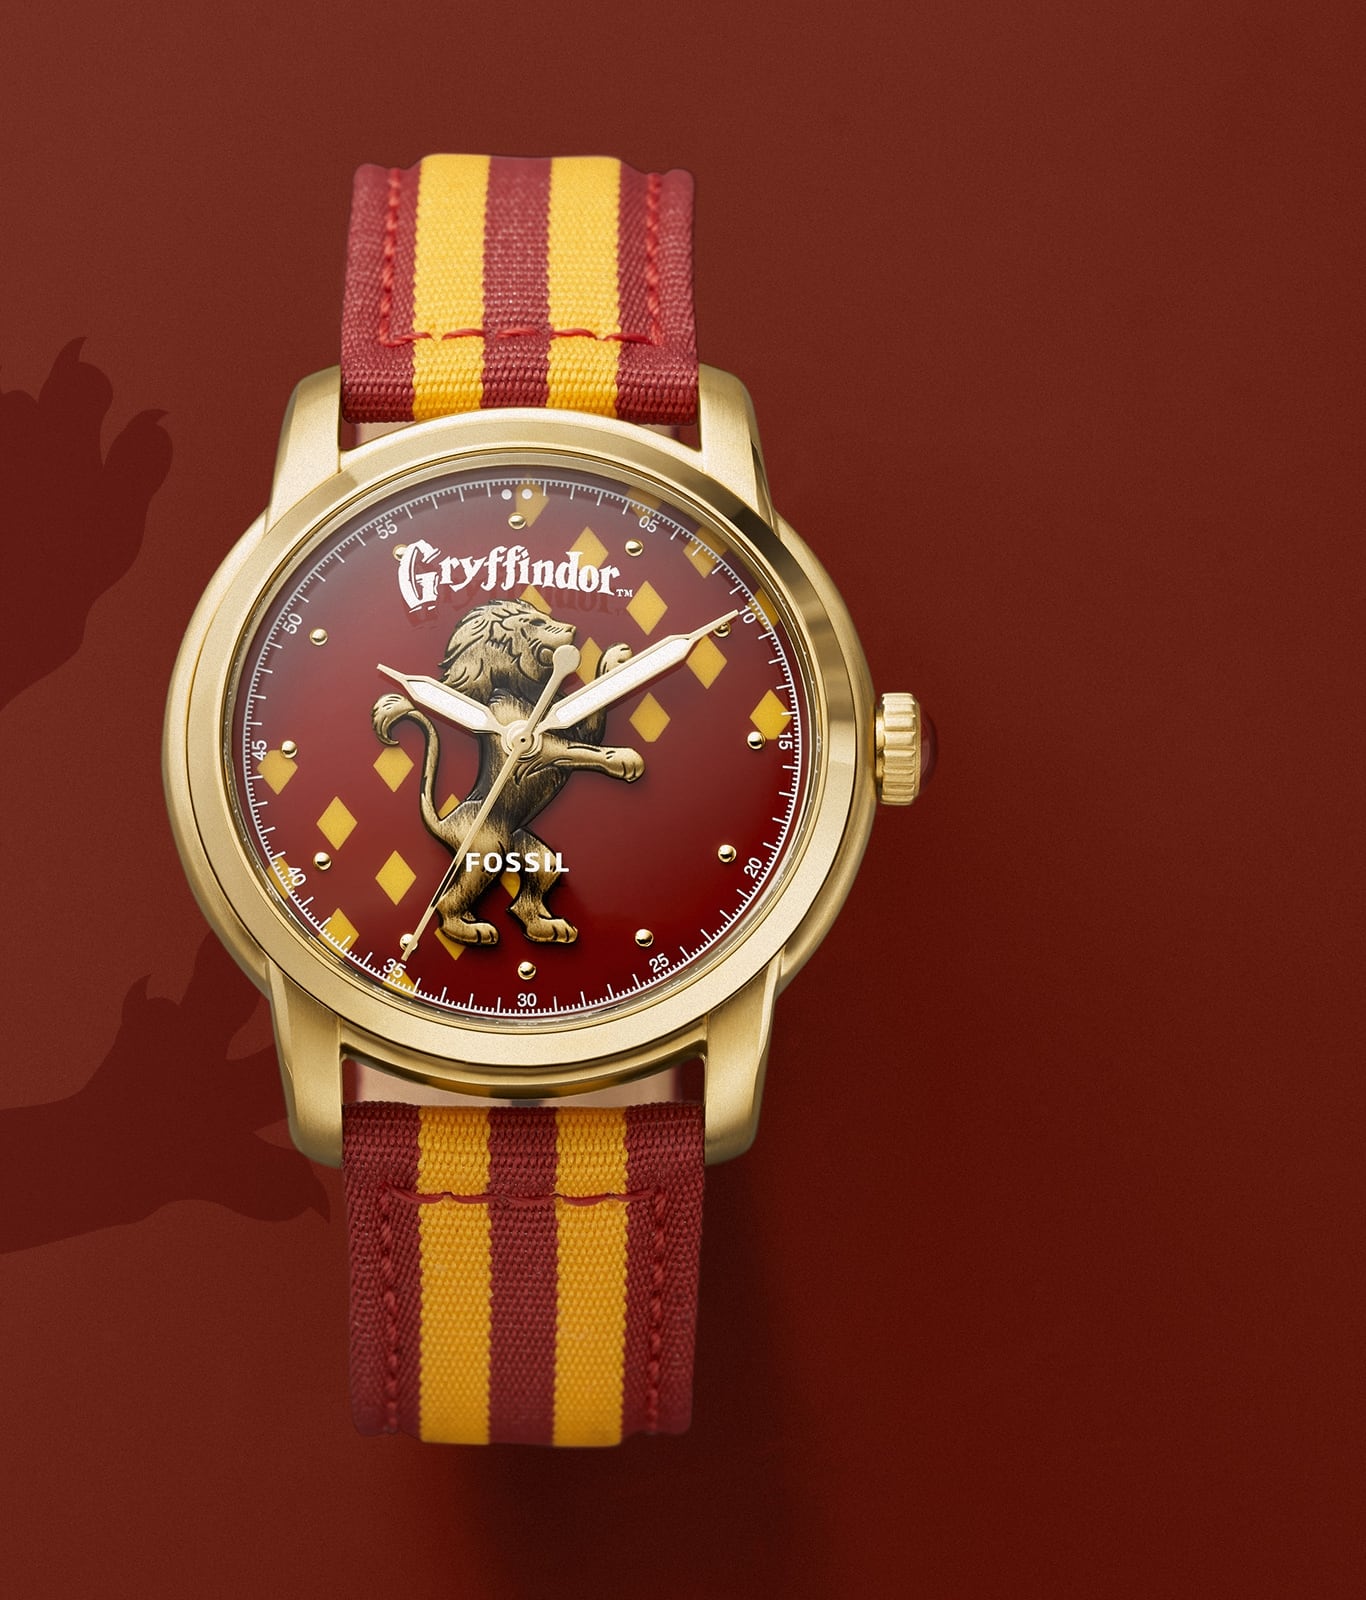 TAIWAN: New Arrivals – Luminous Harry Potter watches inspired by the  Hogwarts 4 houses!